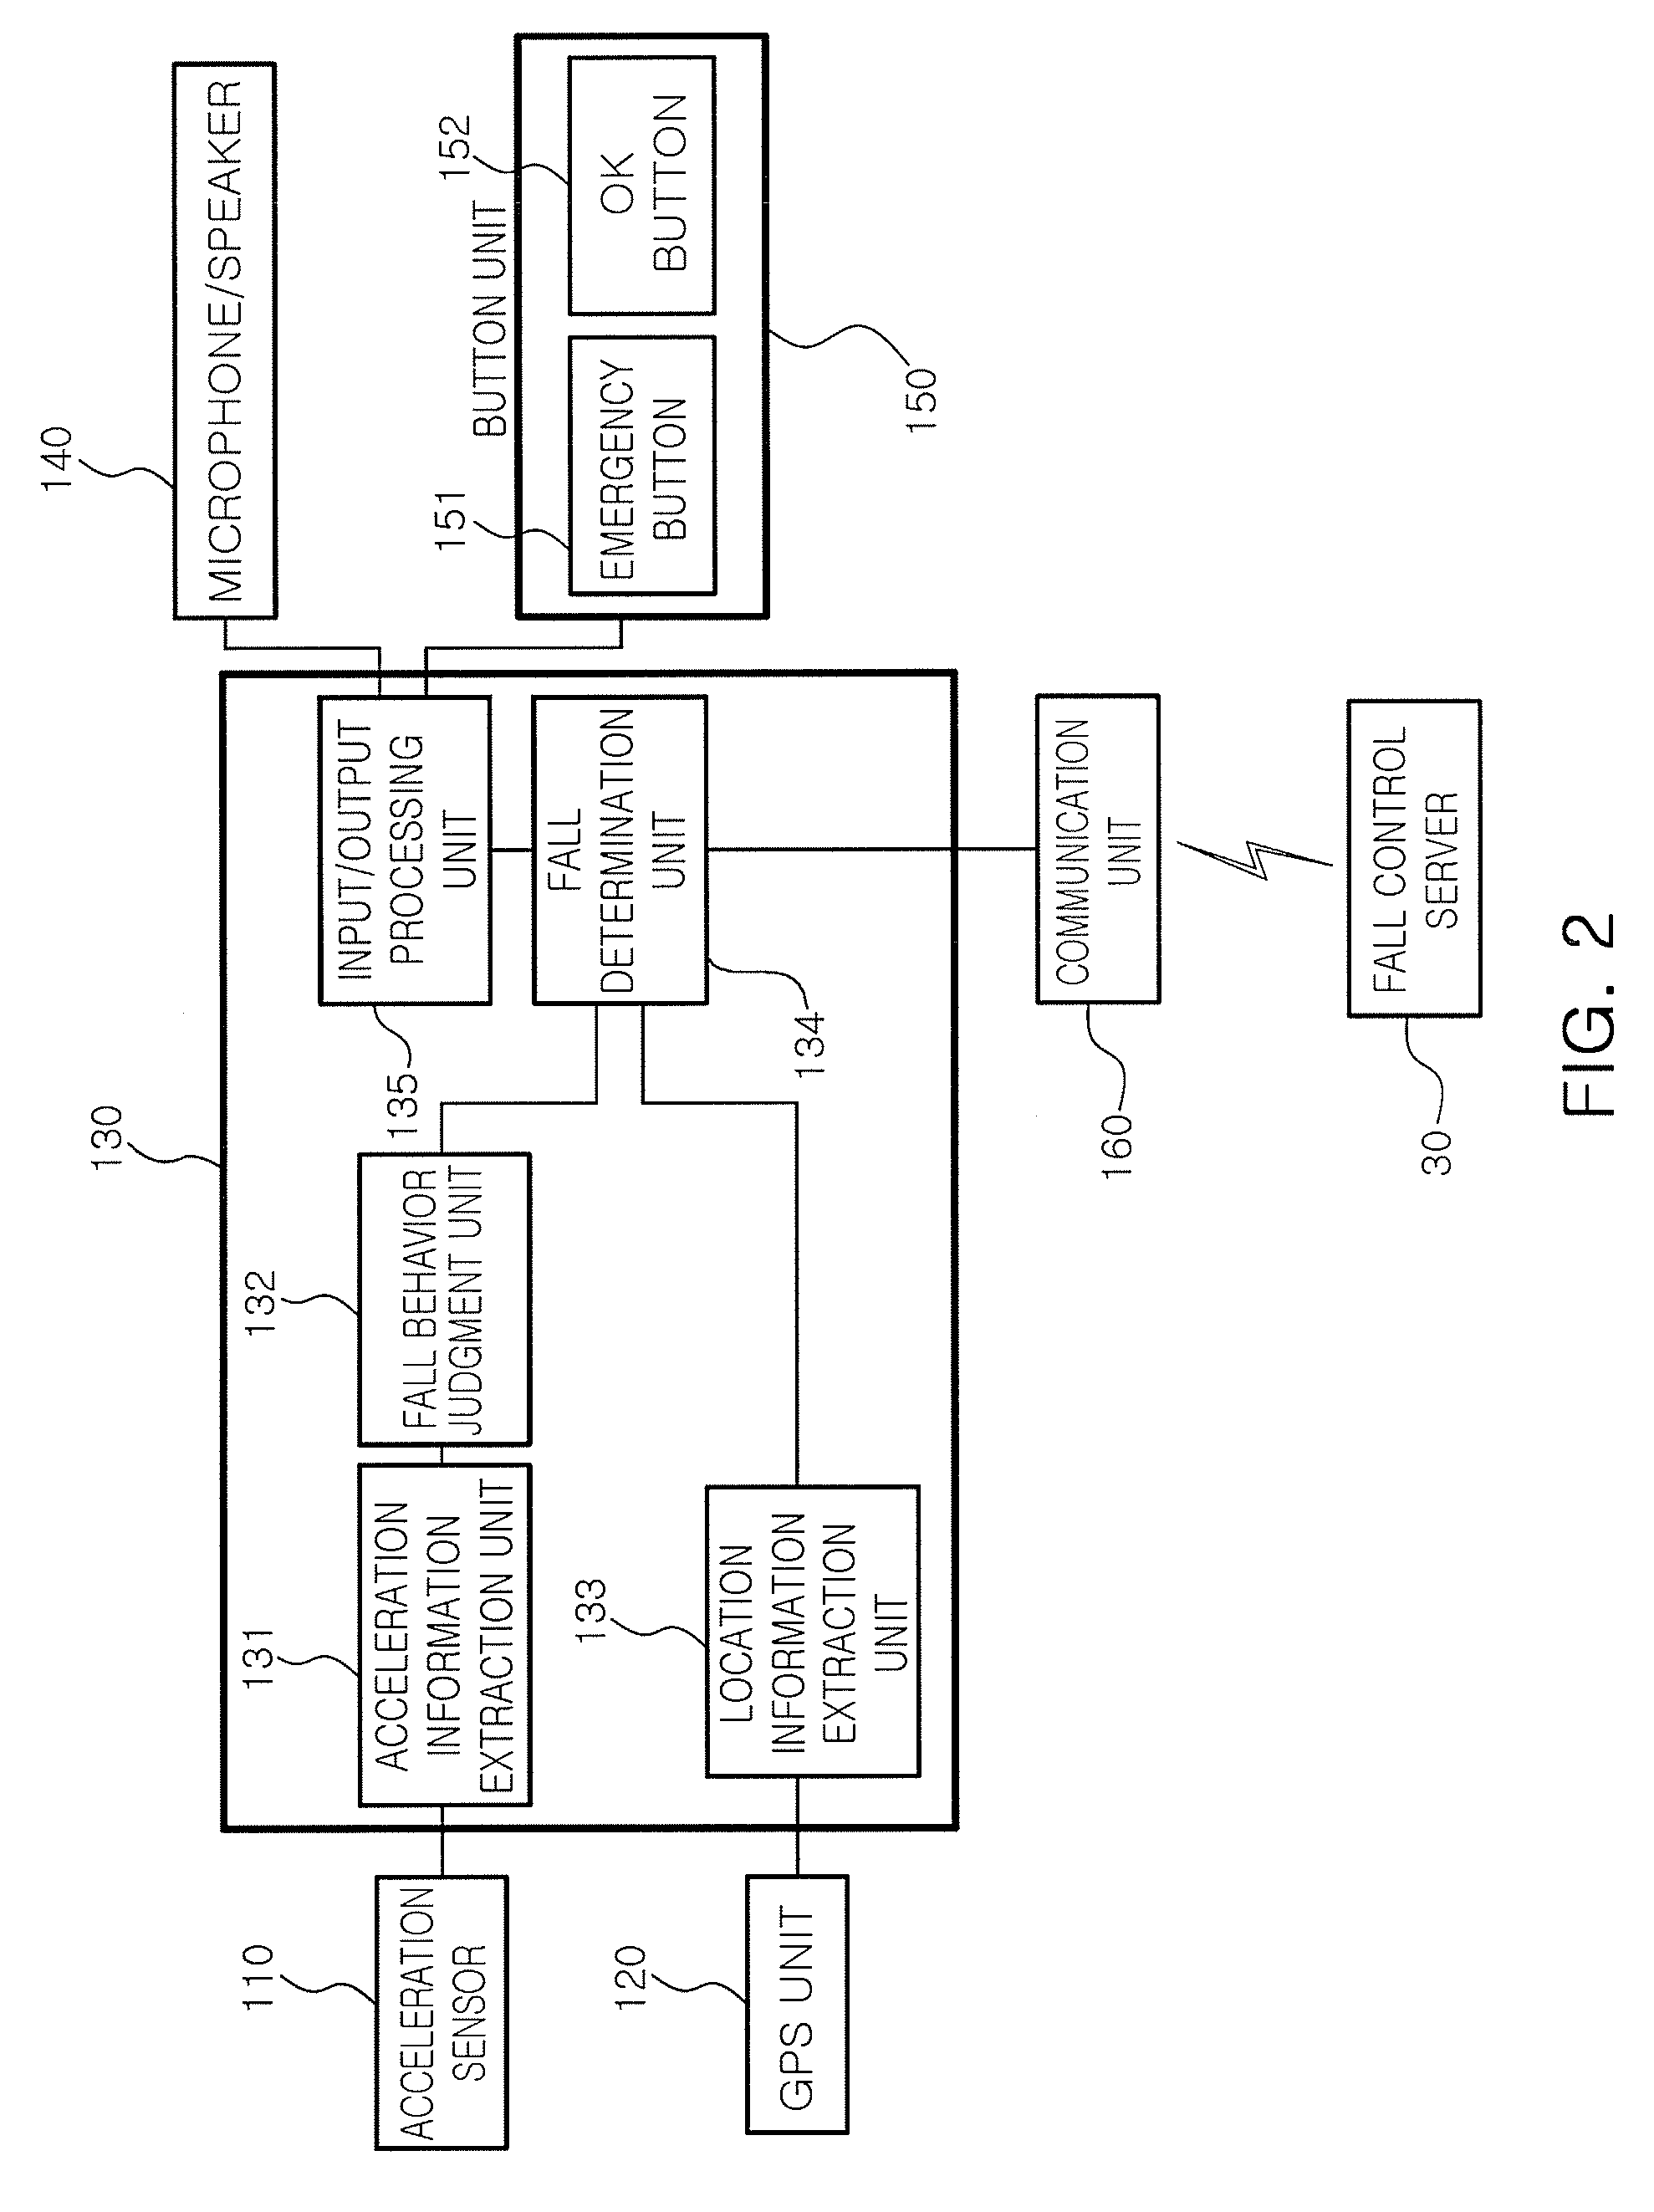 Fall accident detection apparatus and method